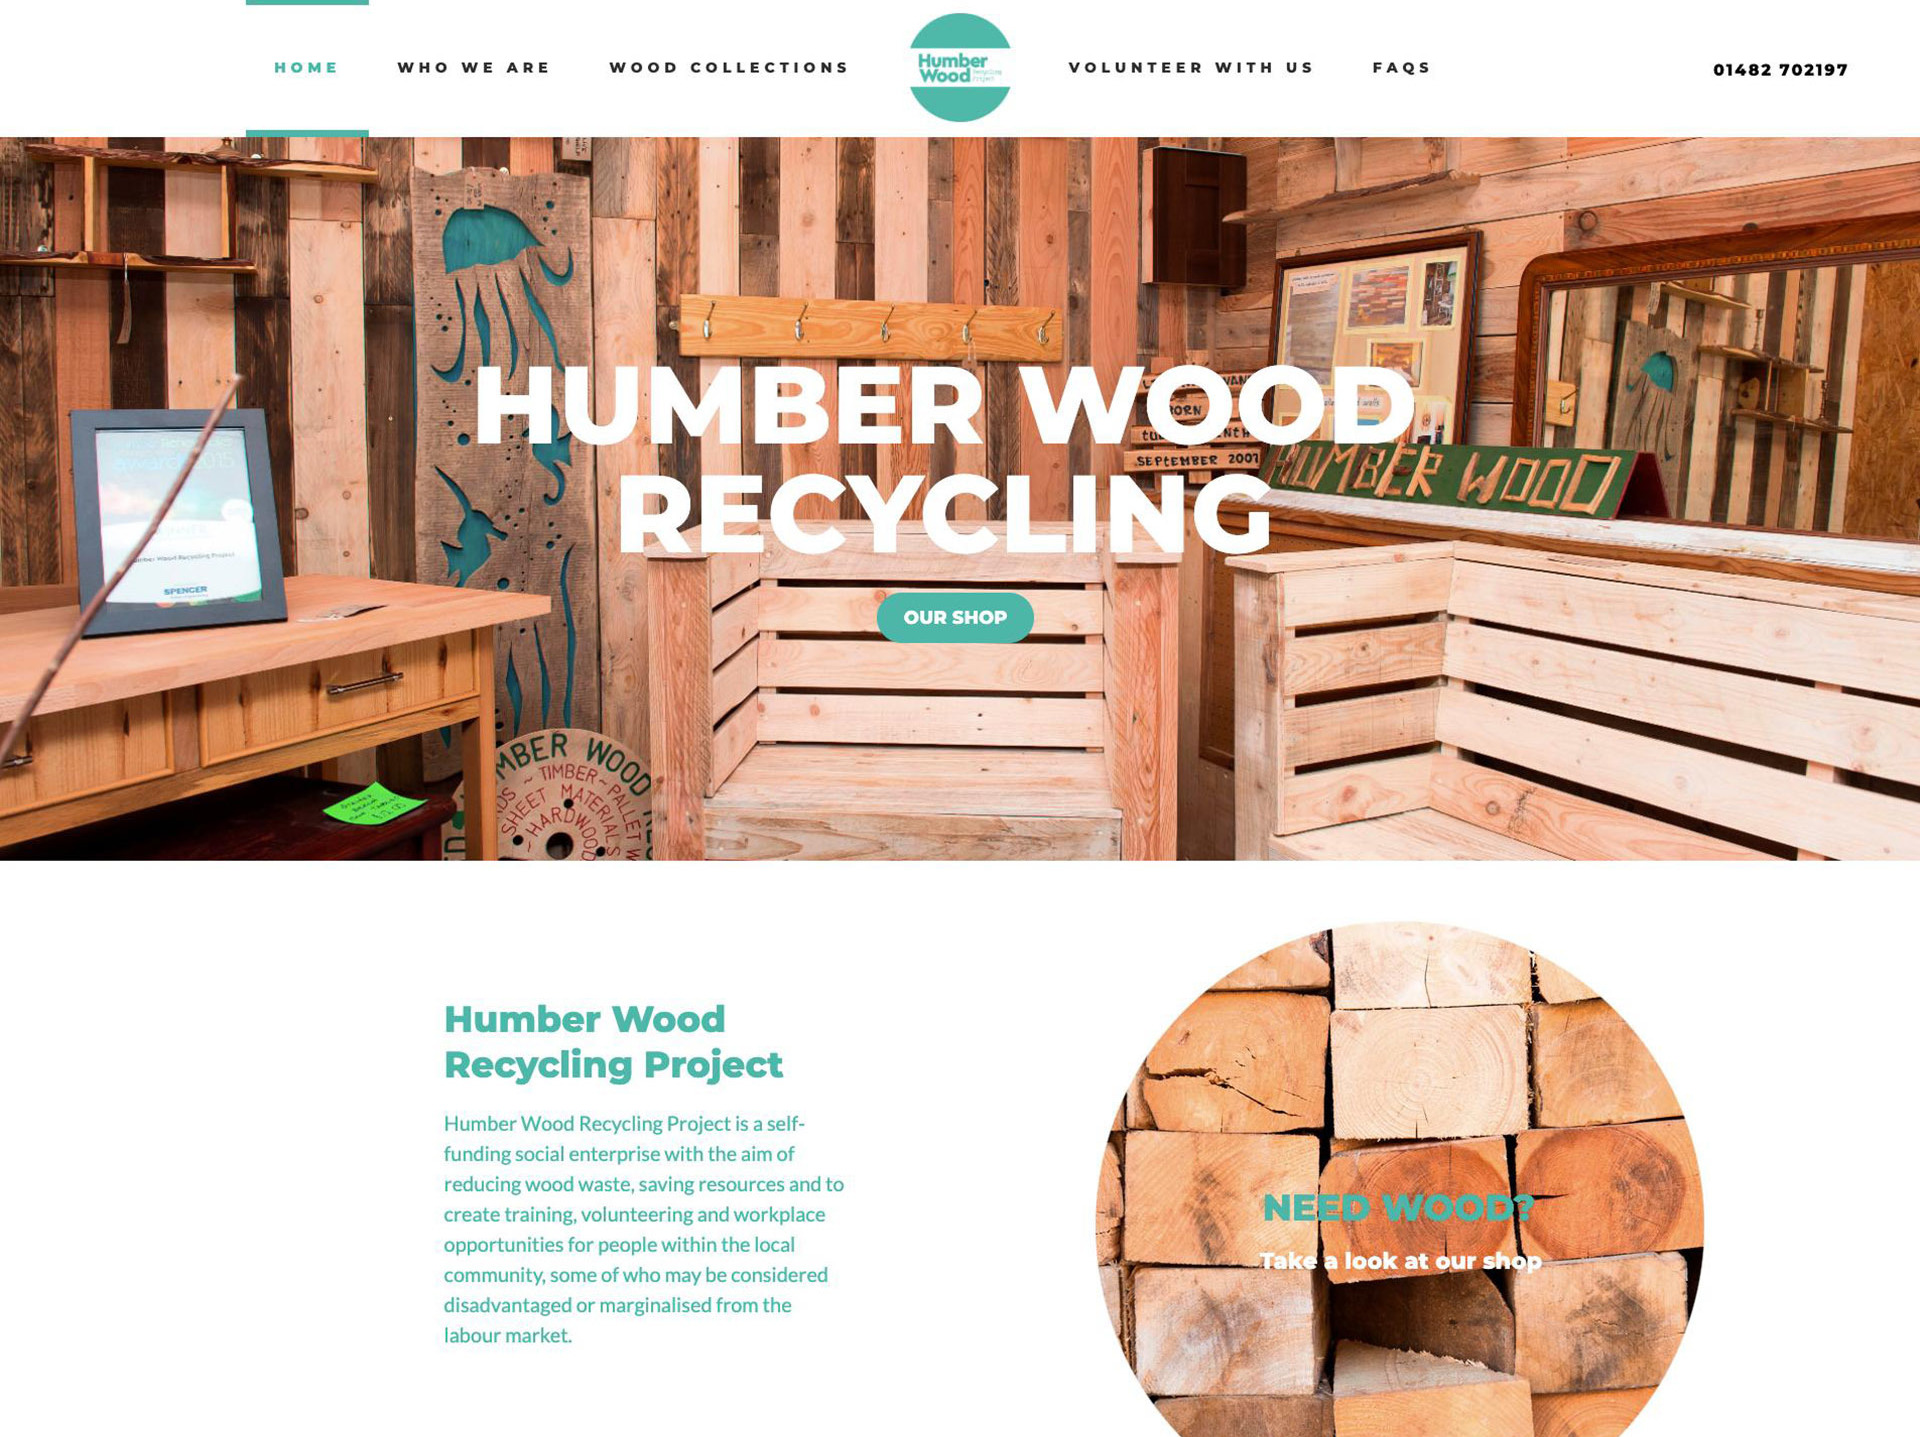 Humber Wood Recycling website